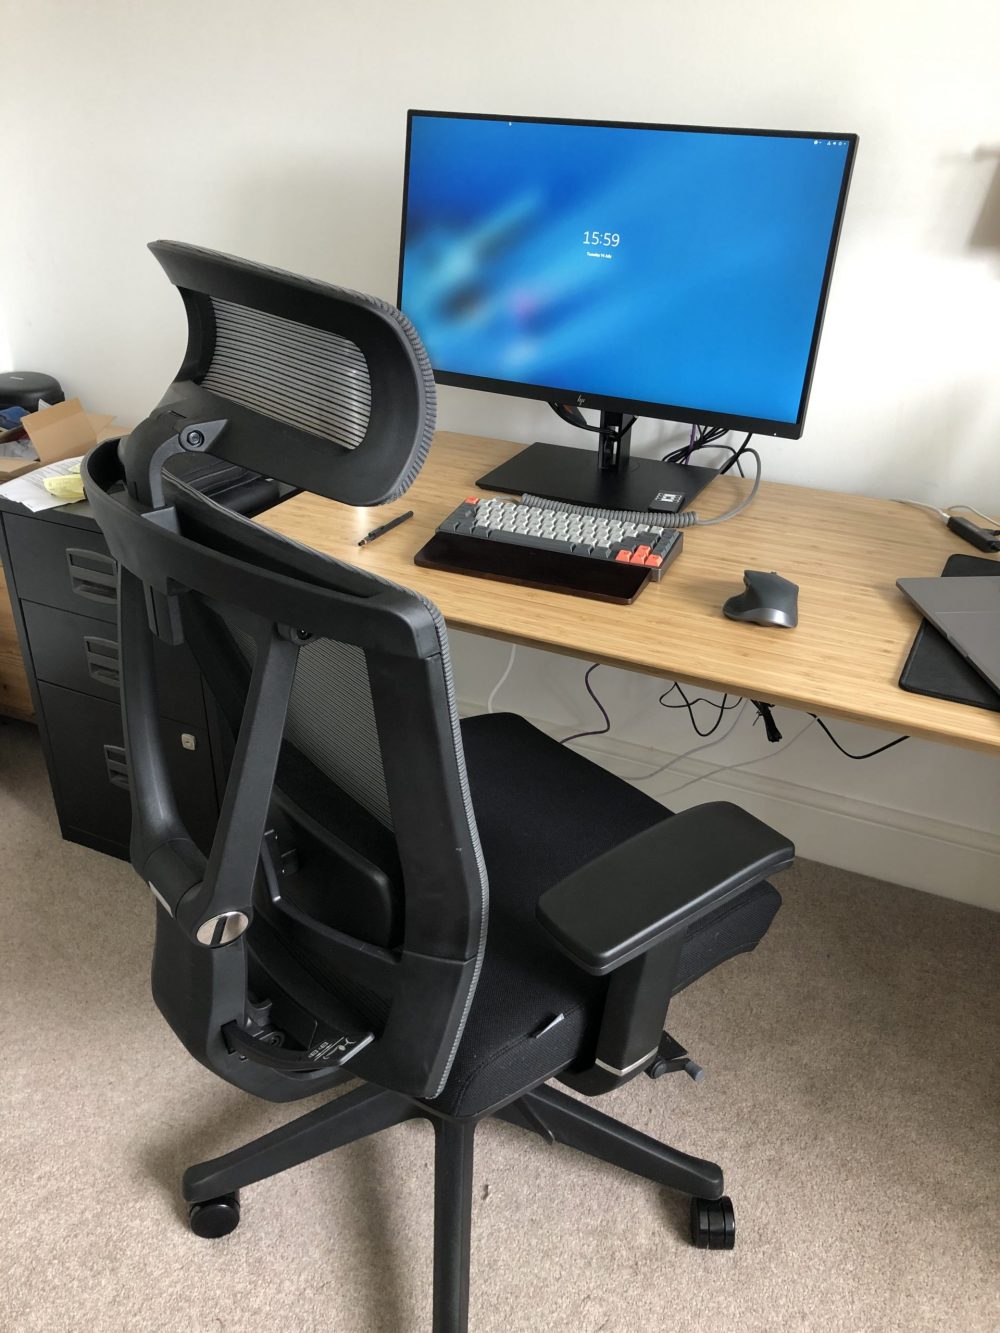 ErgoChair 2 assembled and ready to use